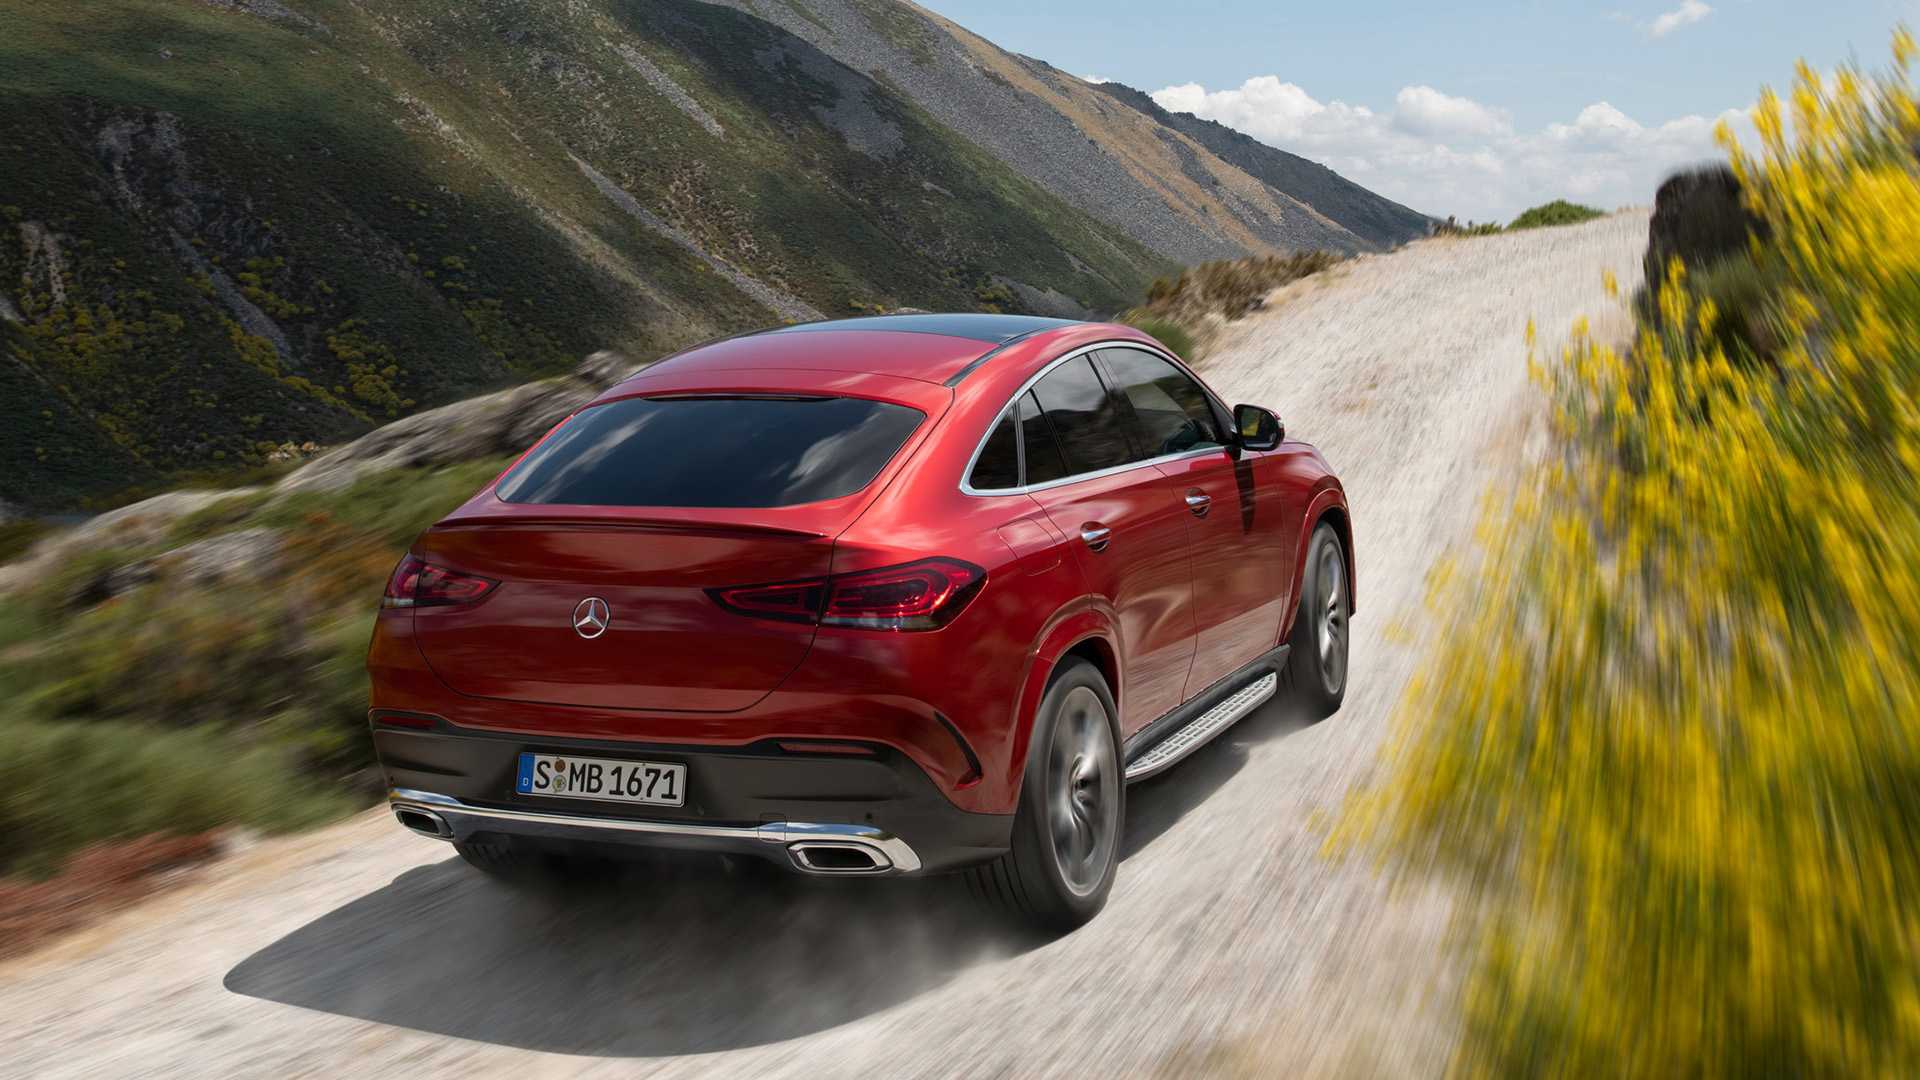 mercedes-gle-coupe-2019-9